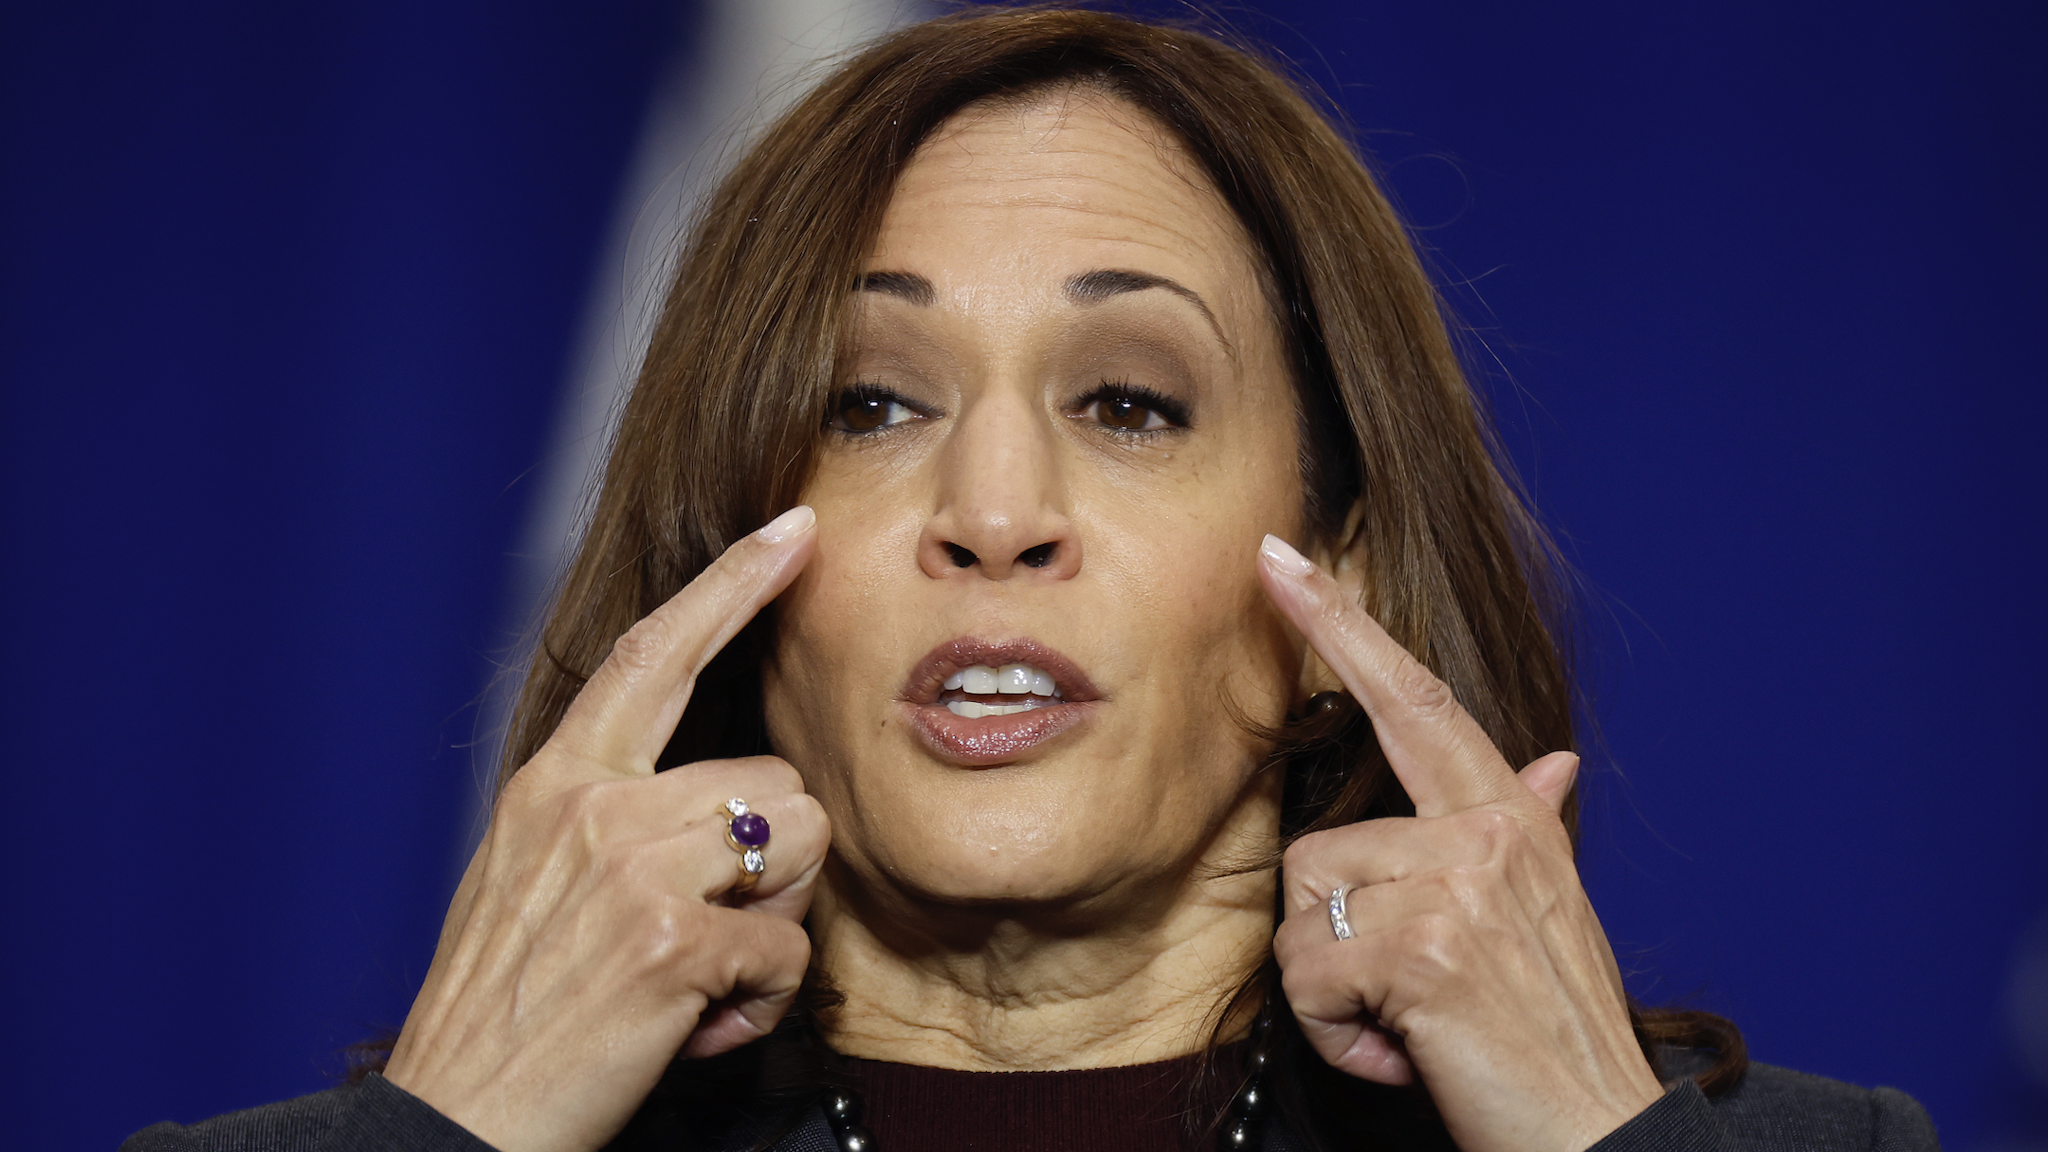 BRANDYWINE, MARYLAND - DECEMBER 13: U.S. Vice President Kamala Harris talks about the effect of pollution on her sight and taste remarks at the Prince George’s County Brandywine Maintenance Facility on December 13, 2021 in Brandywine, Maryland. The county is working to electrify its entire vehicle fleet. During the visit Harris announced the Biden Administration's new Electric Vehicle Charging Action Plan that works to fast-track investments from the Bipartisan Infrastructure Law and create a joint electric vehicles office between the departments of Energy and Transportation.